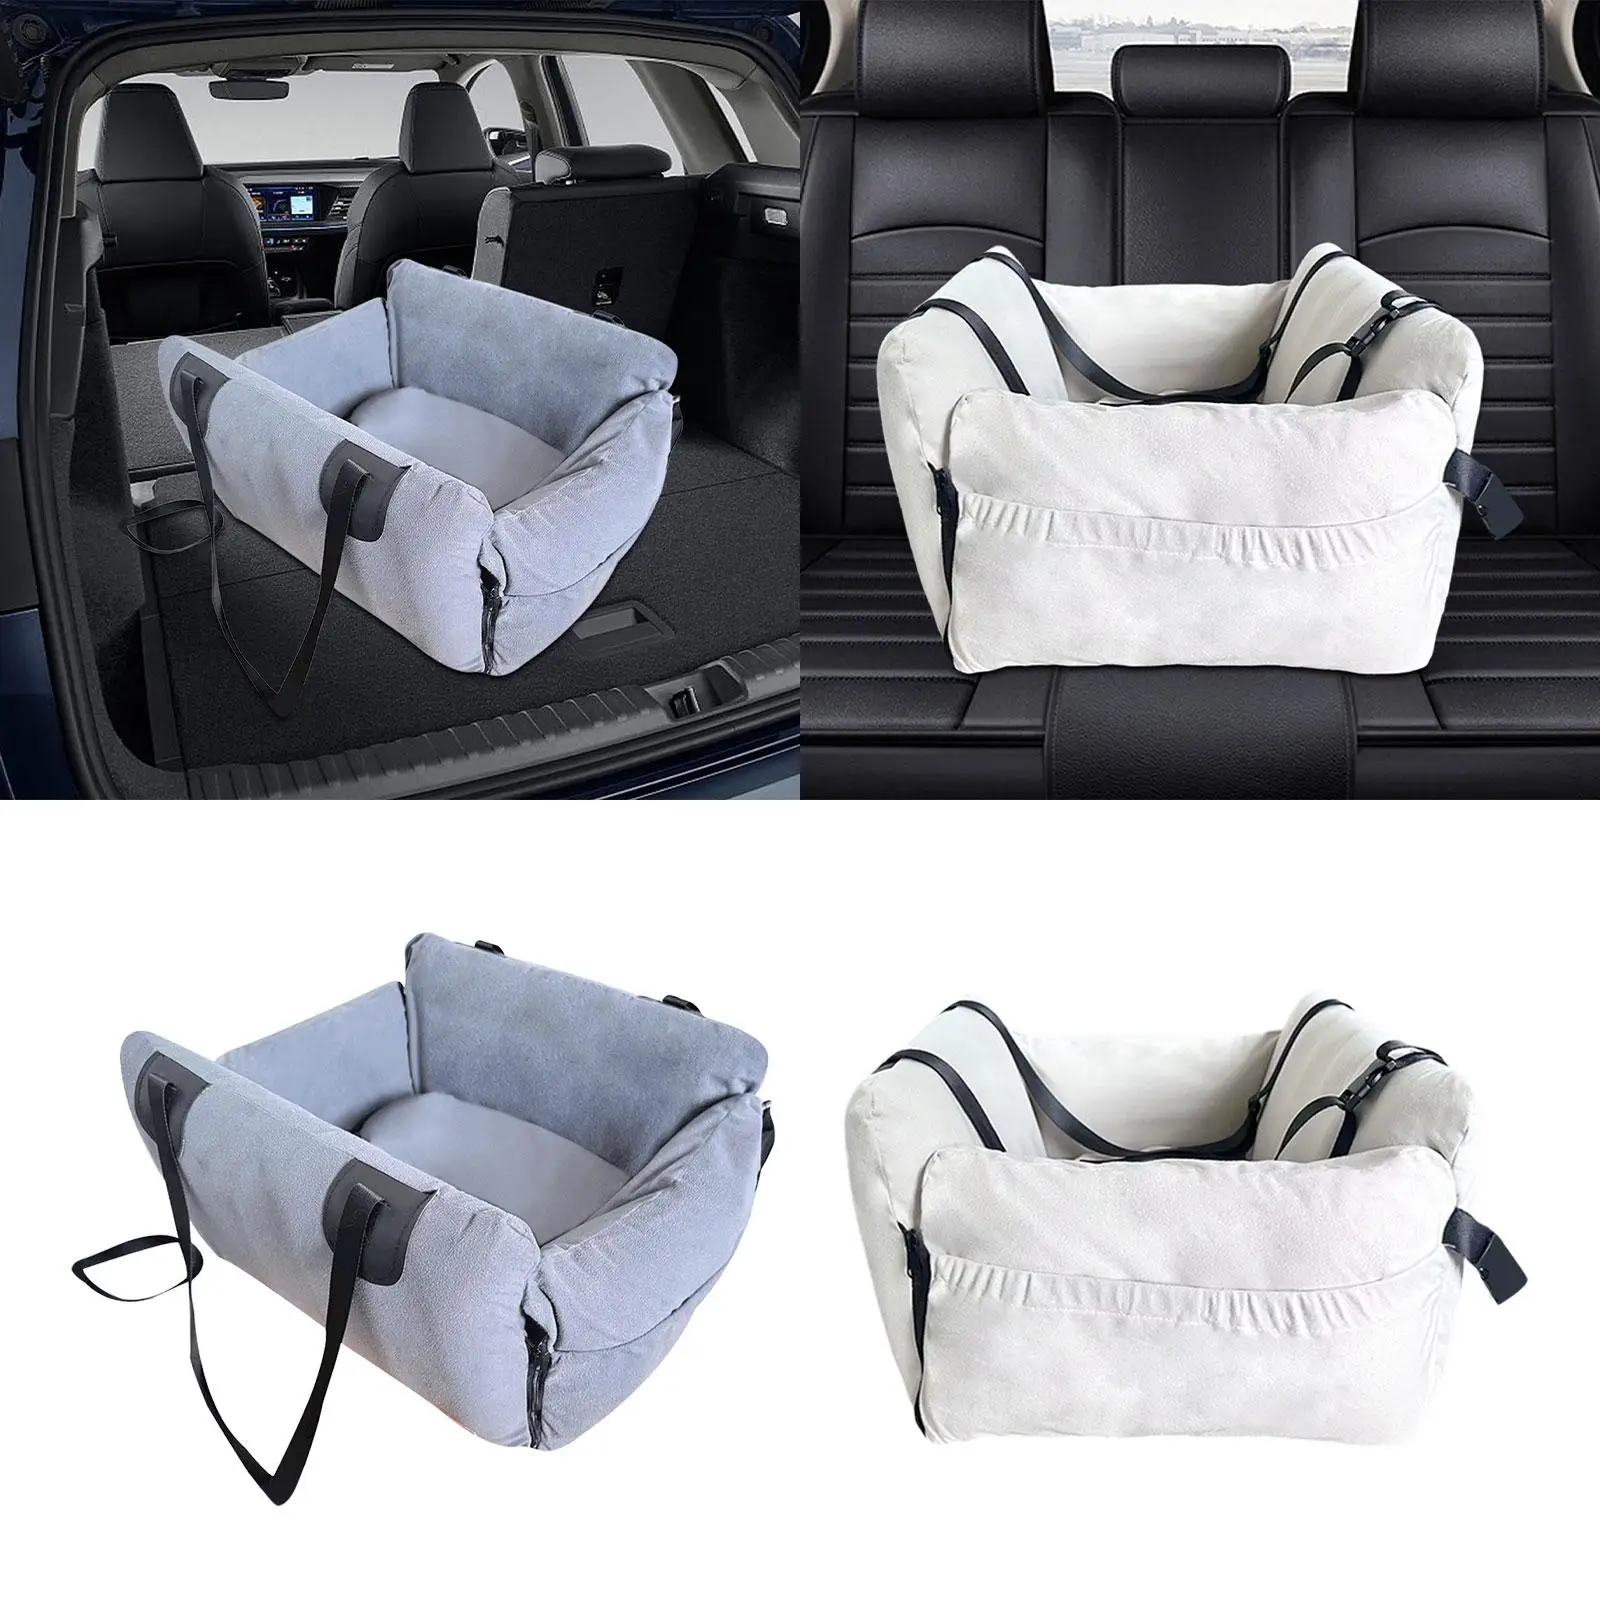 Dog Cat Booster Seat in Car Armrest Small Dog Carrying Bag Dogs Booster Seat